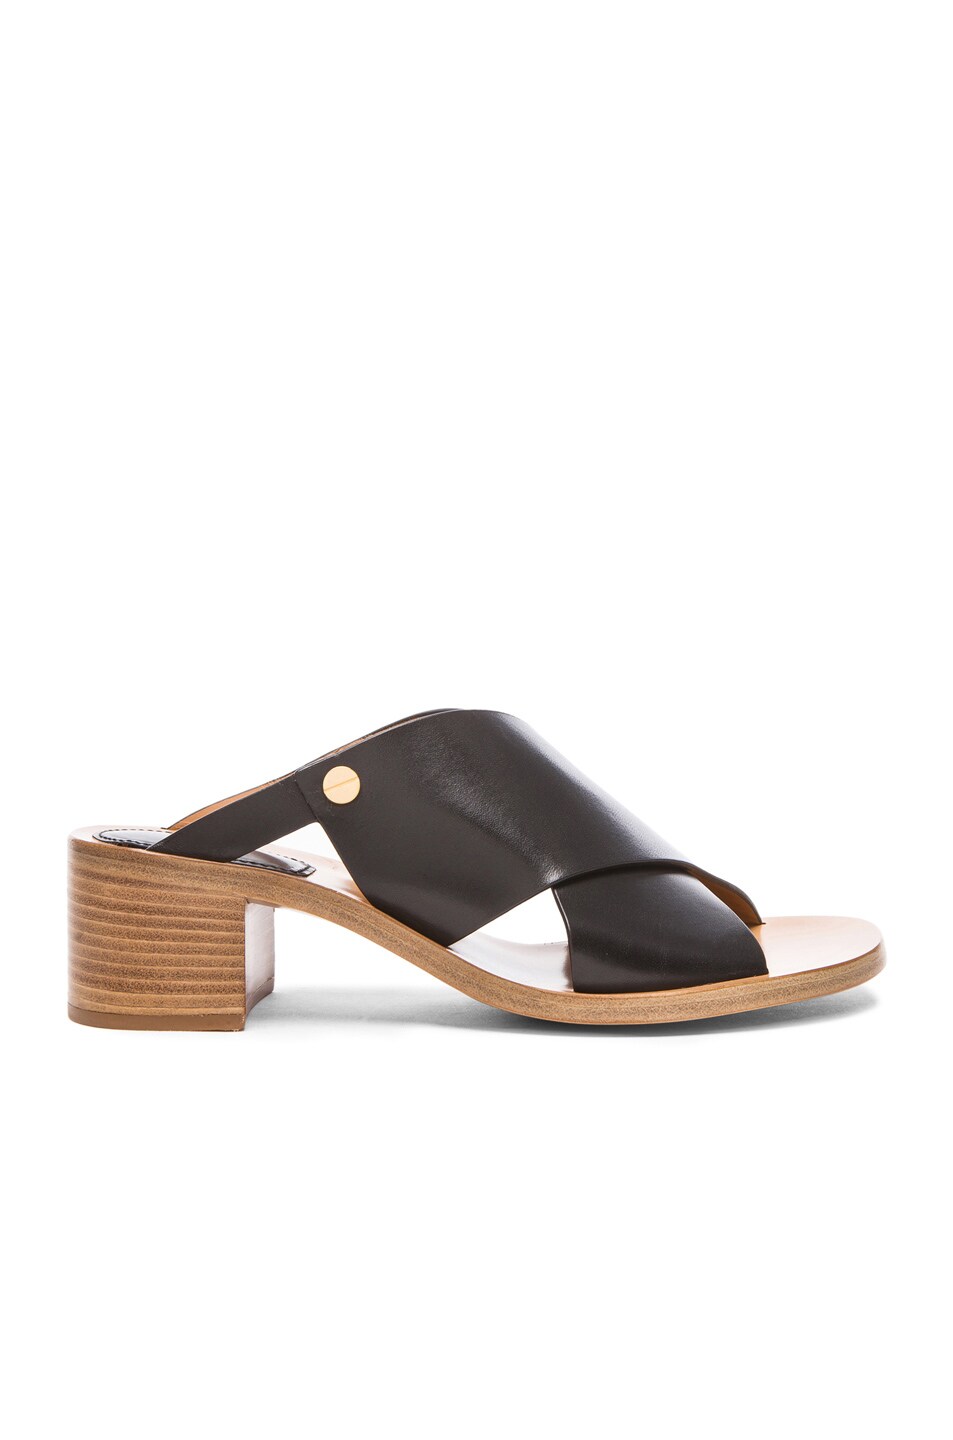 Image 1 of Chloe Criss Cross Leather Sandals in Black